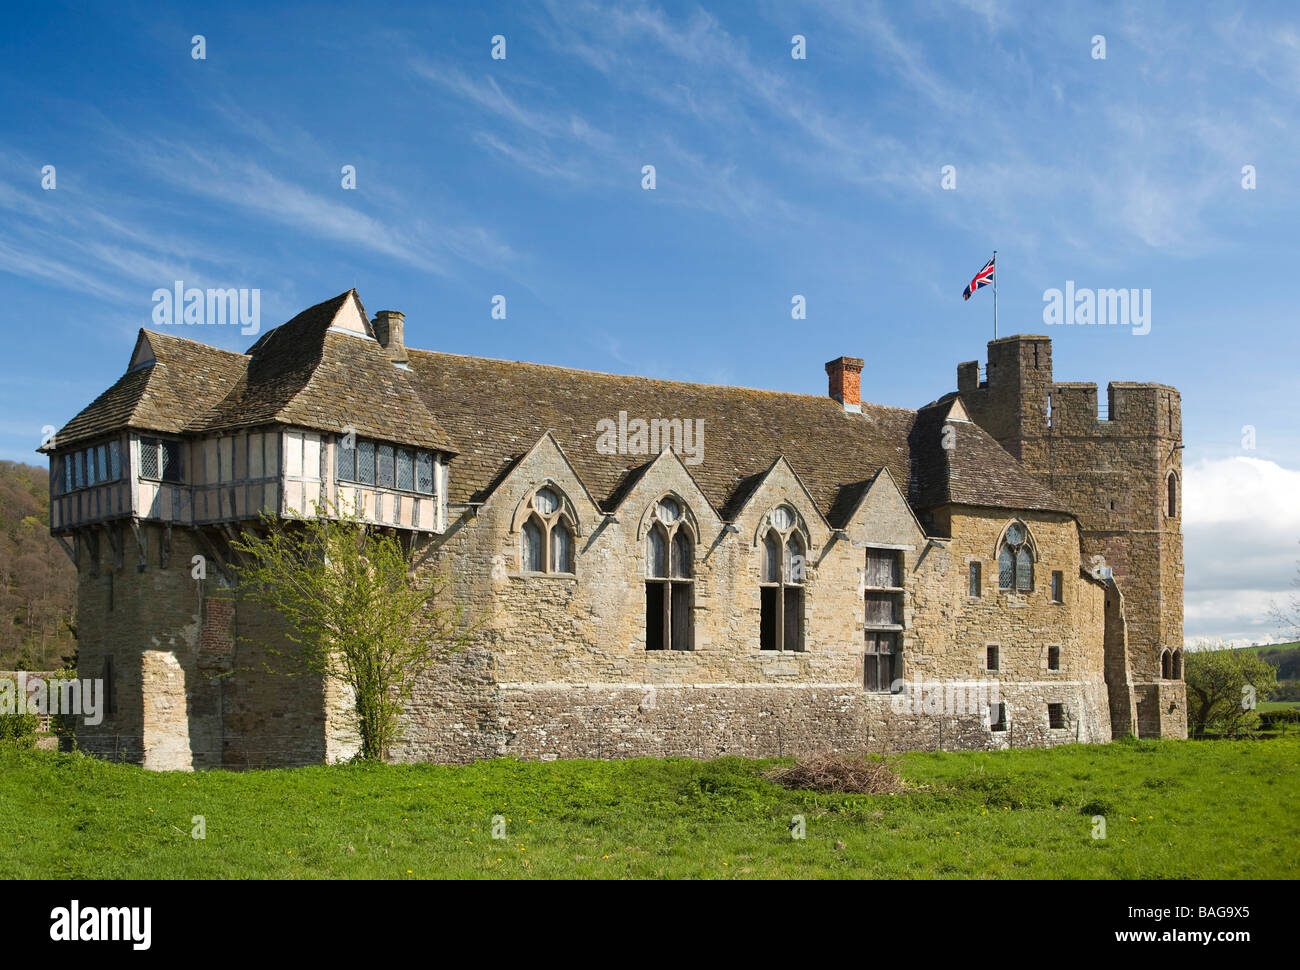 UK England Shropshire Stokesay Castle fortified manor house Stock Photo